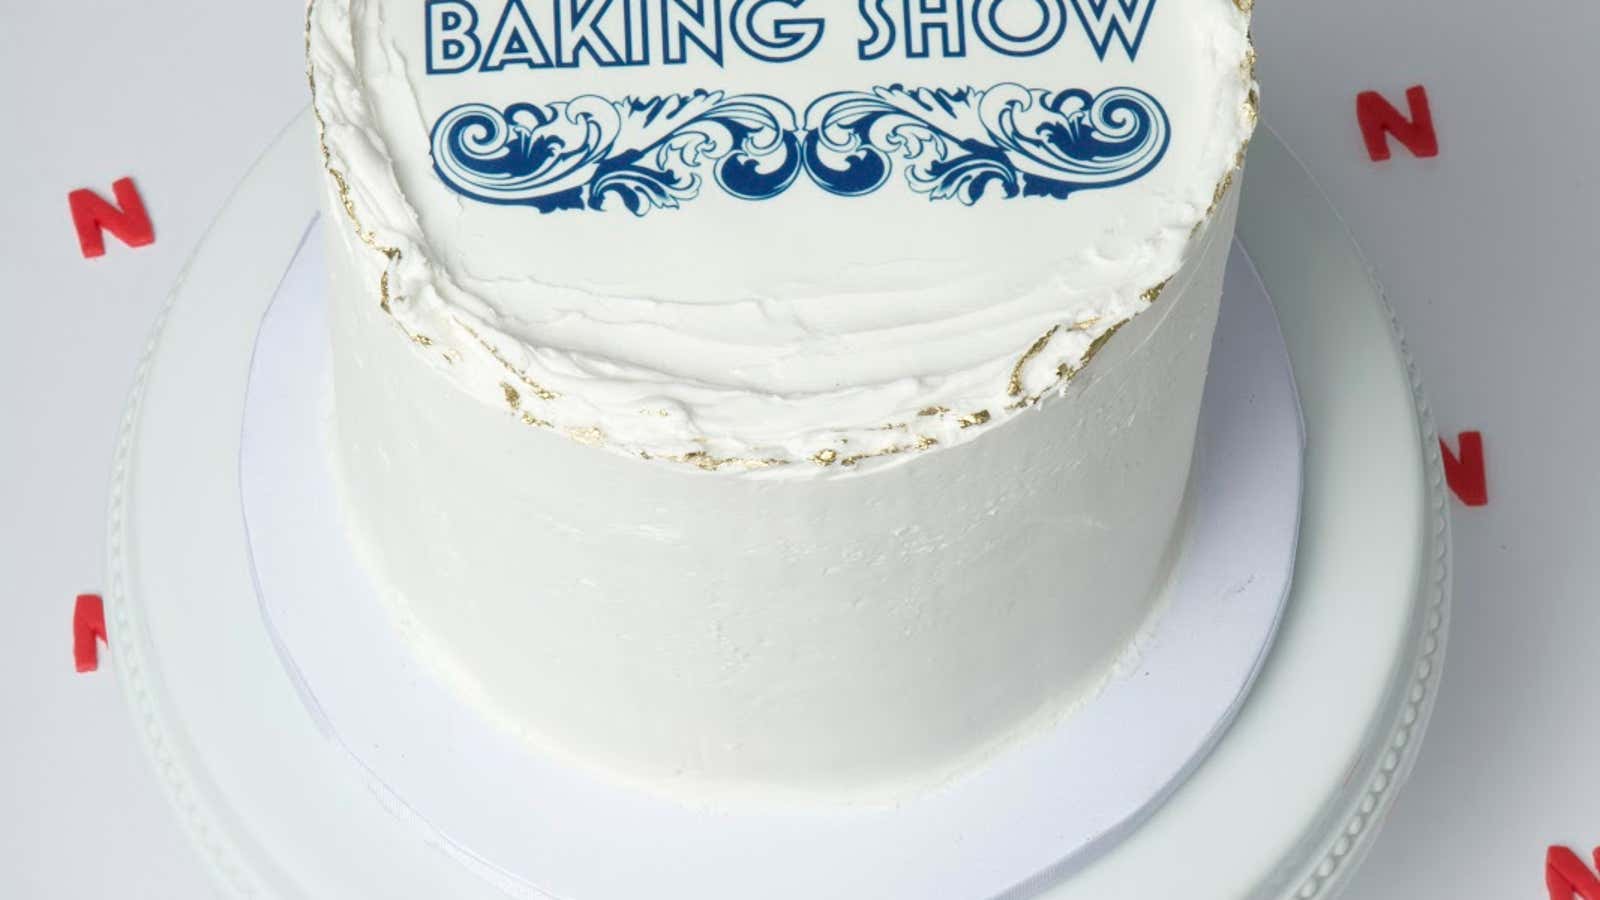 Netflix is making it possible to binge on the Great British Baking Show.